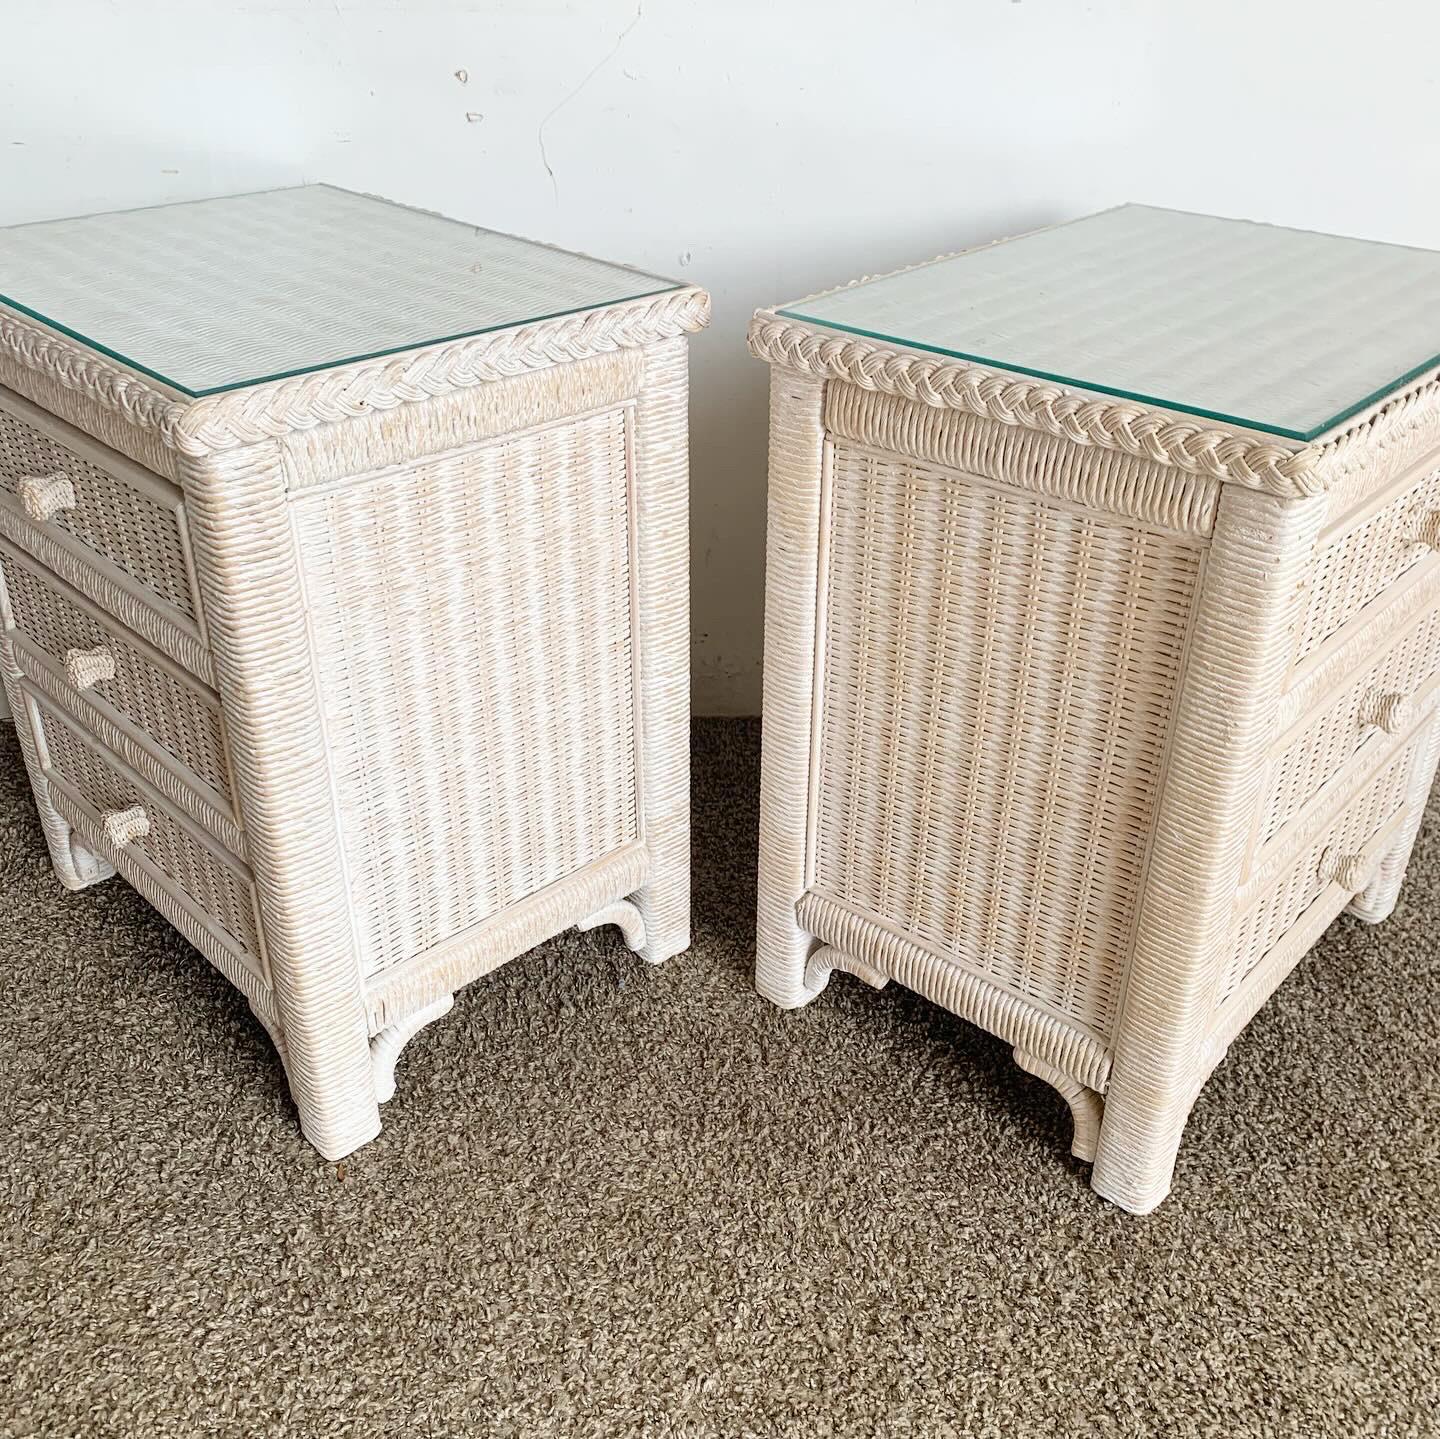 20th Century Boho Chic White Washed Wicker Rattan Henry Link Nightstands by Lexington For Sale